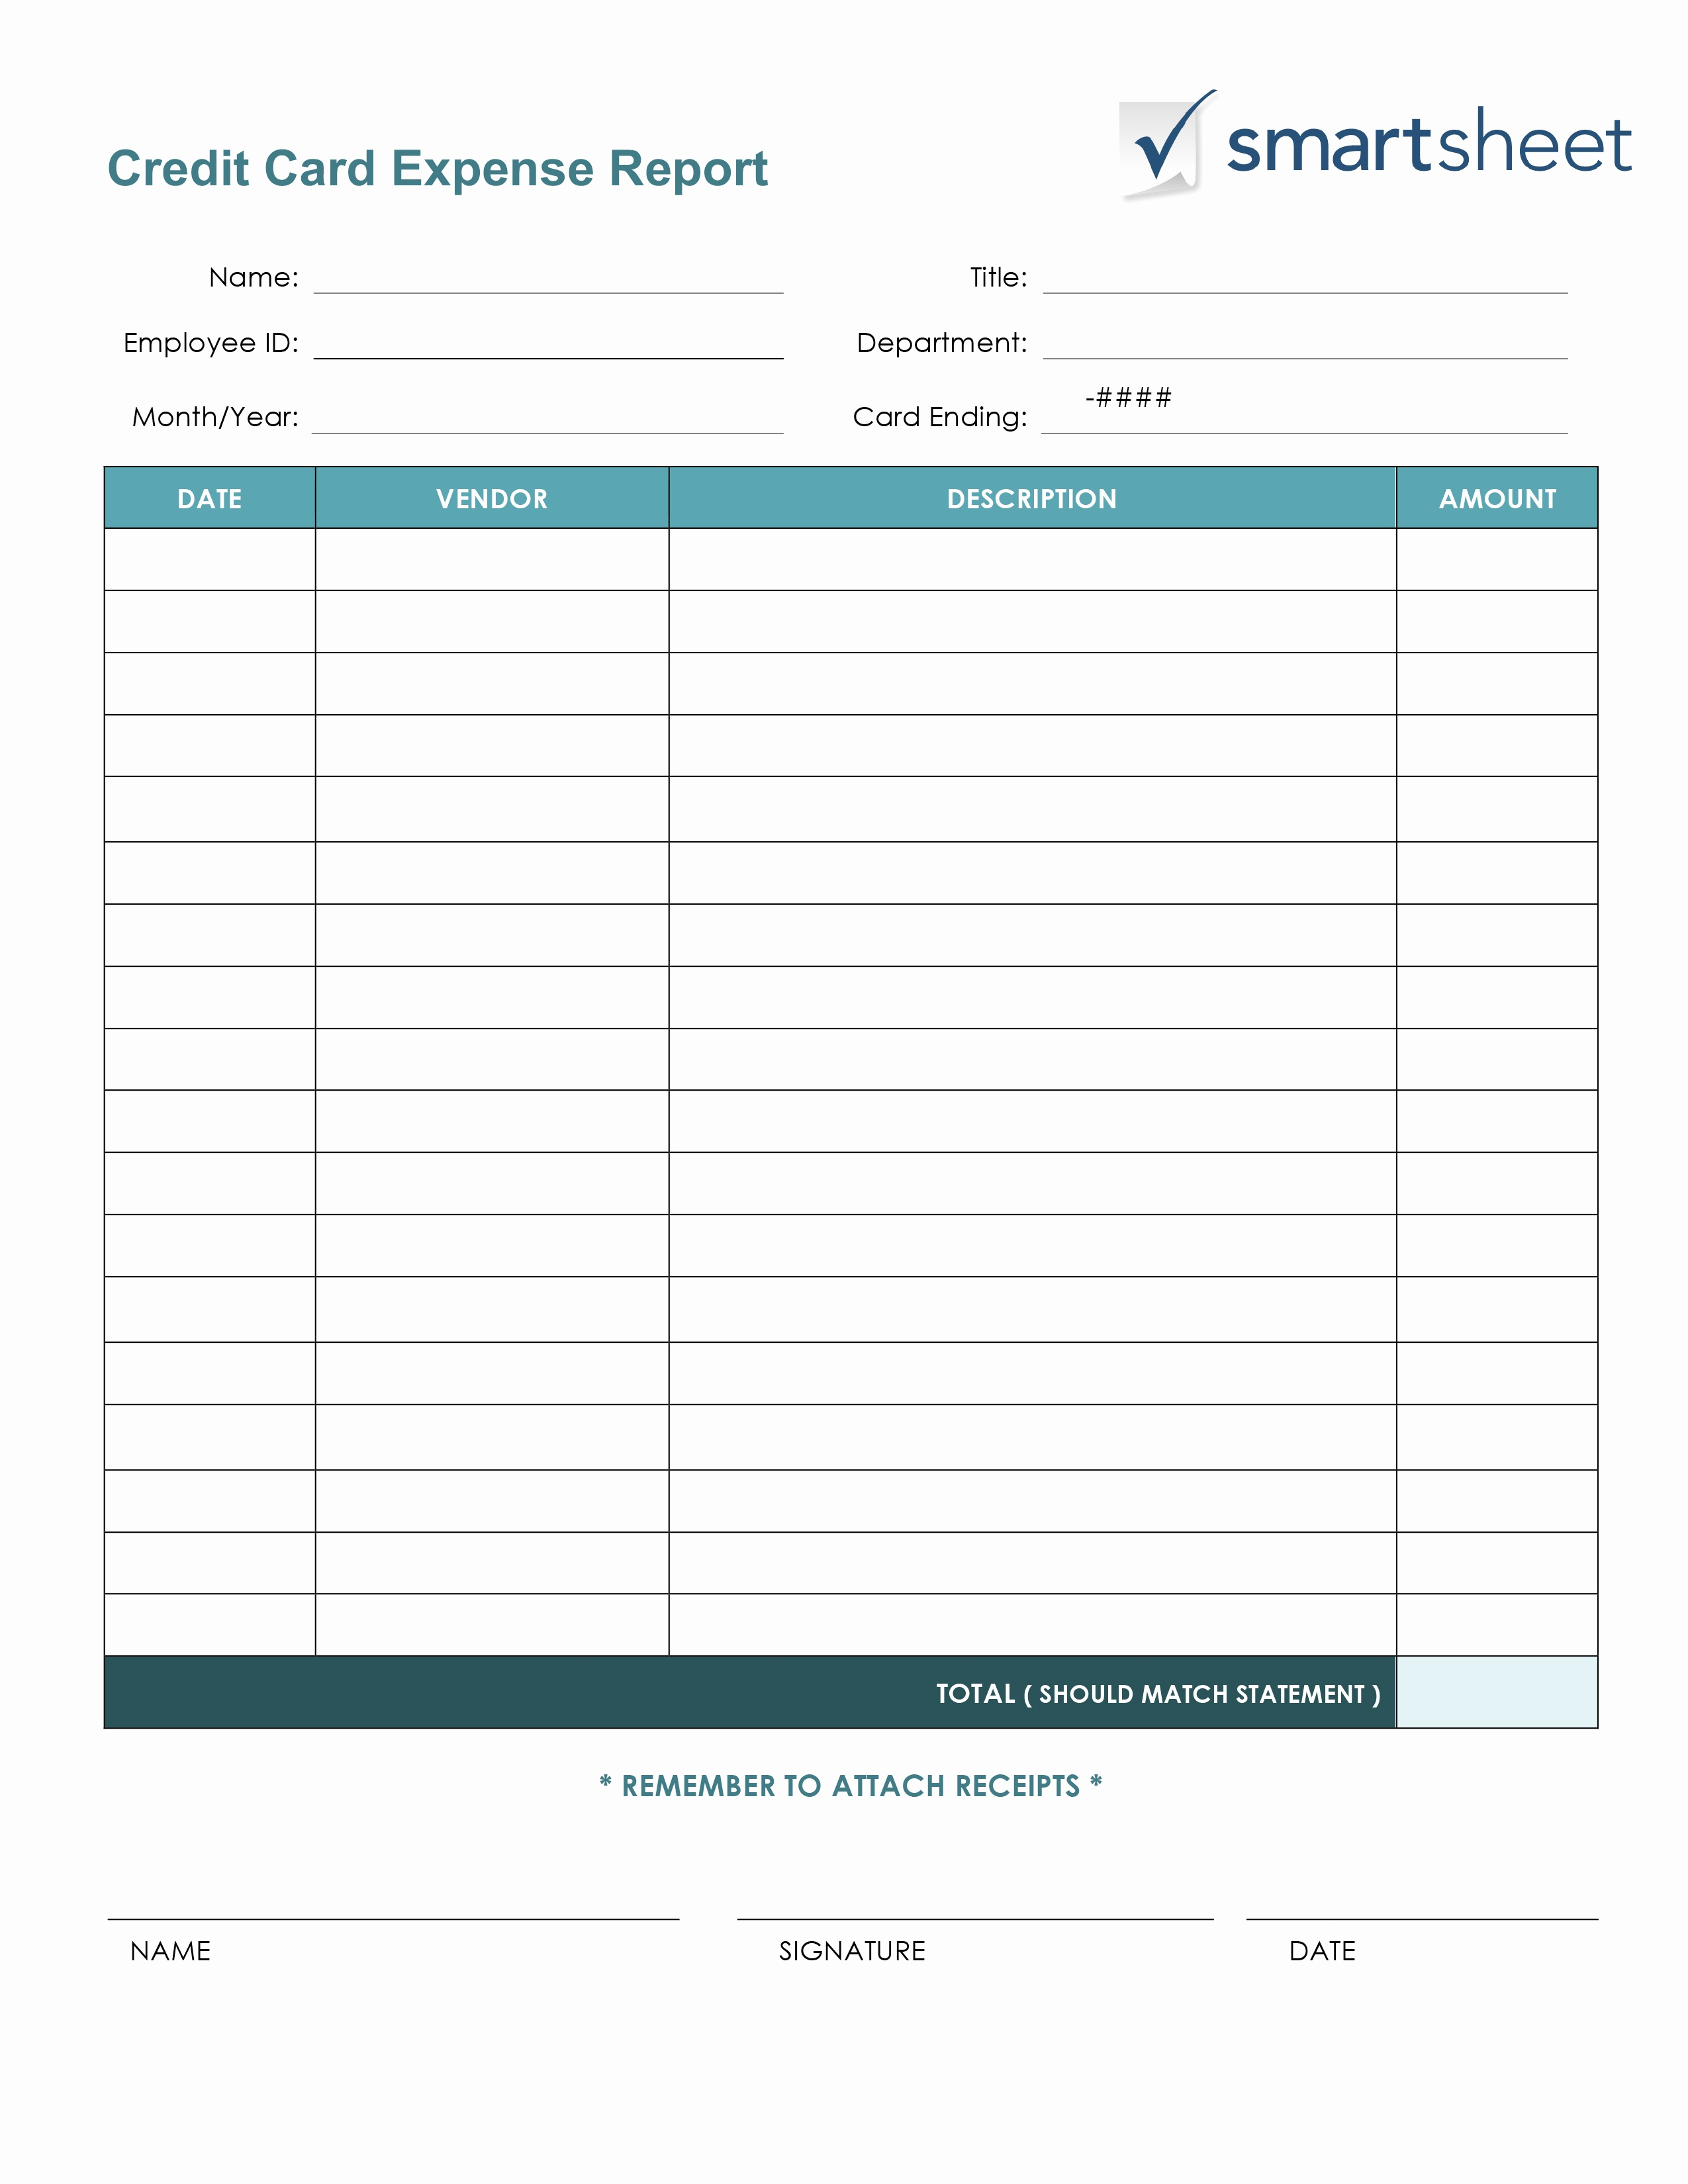 Annual Expenses Spreadsheet Pertaining To Example Expense Report Annual Template New Free Expenses Spreadsheet